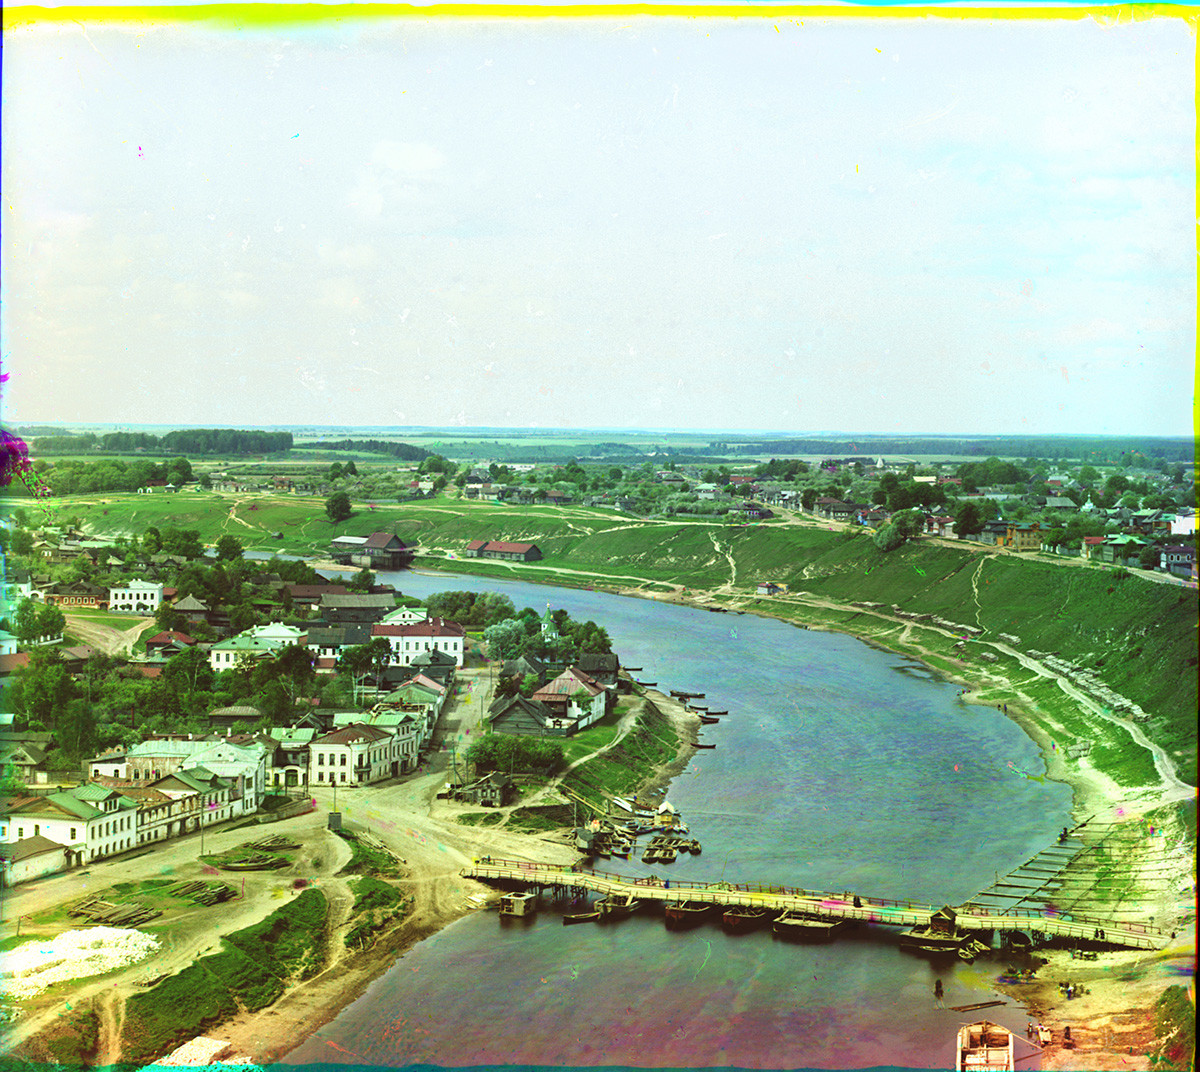 View west up Volga River from Dormition Cathedral bell tower. Middle: Old wooden pontoon bridge with yellow, red & blue smudges indicating movement of horse during three exposures of Prokudin-Gorsky's negative. Left: Prince Dmitry Side. Summer 1910.